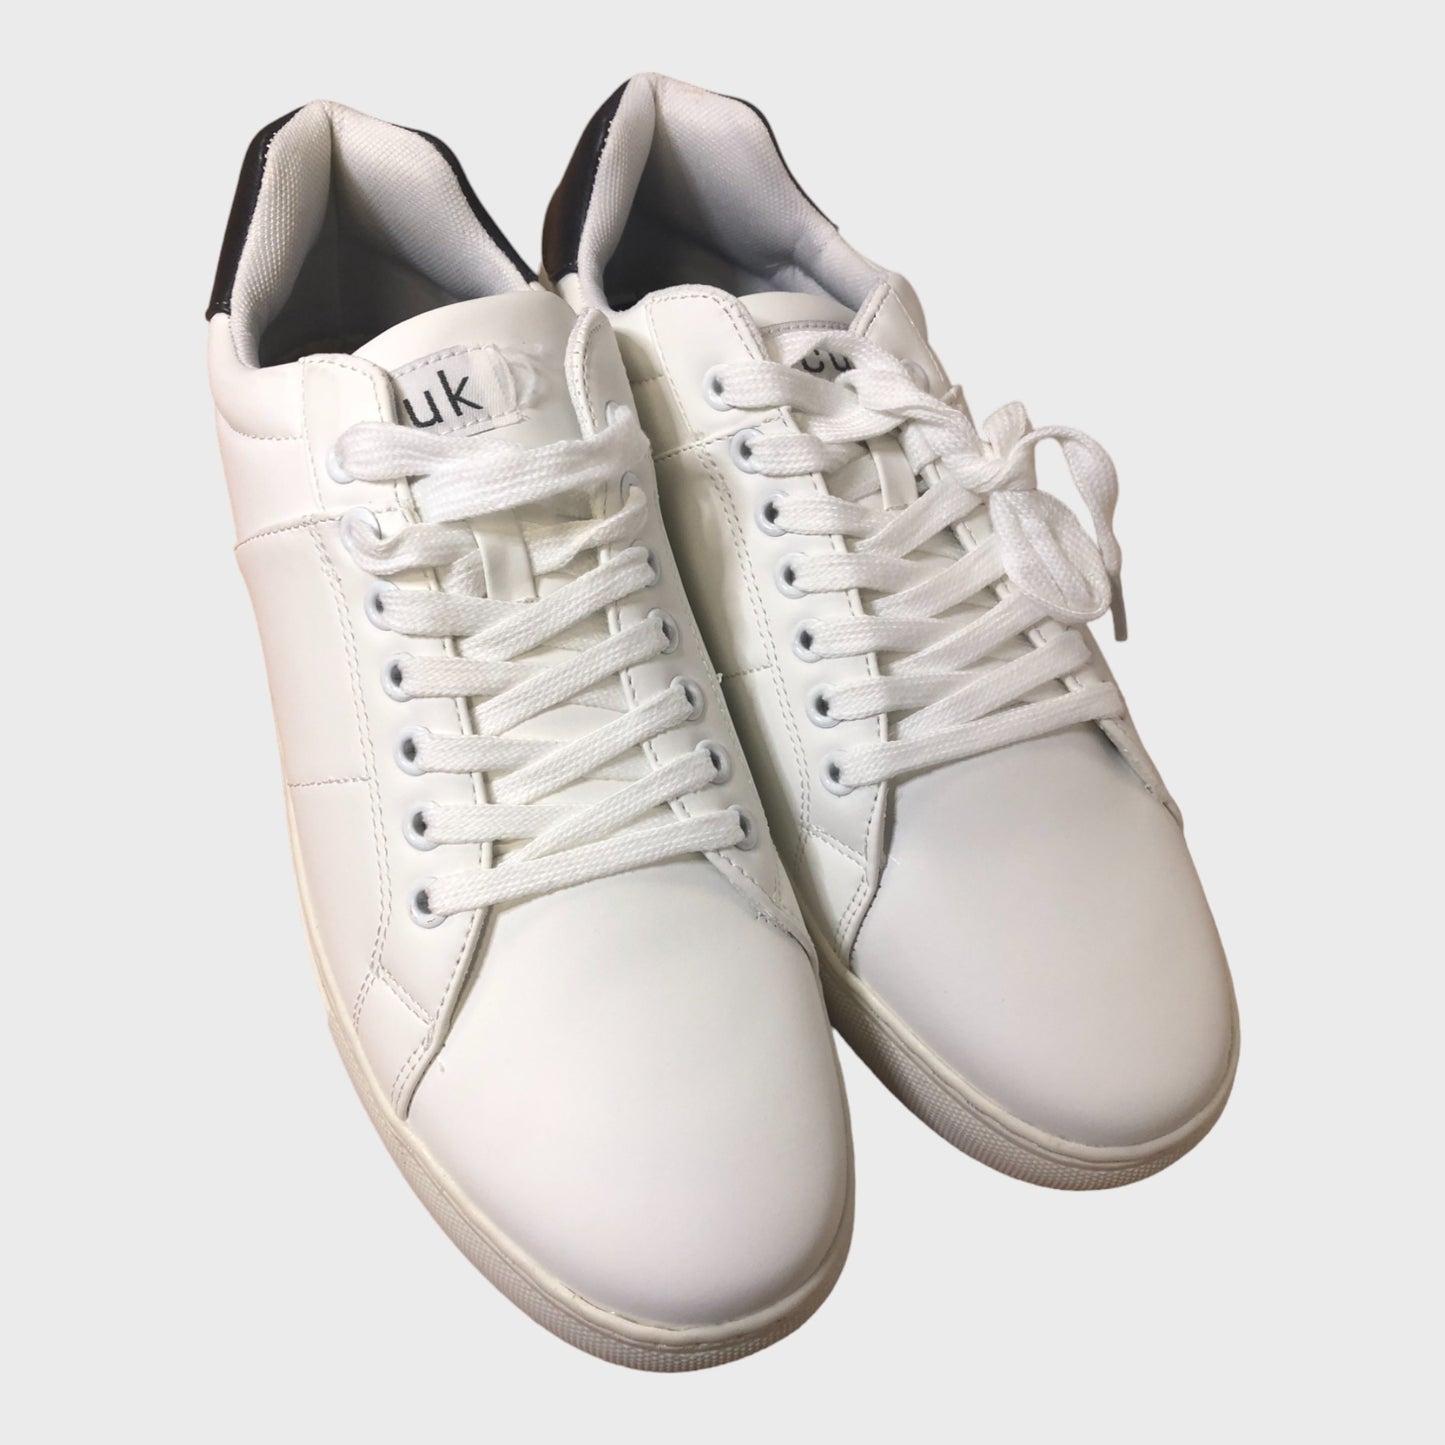 Men's 'French Connection' White Shoes